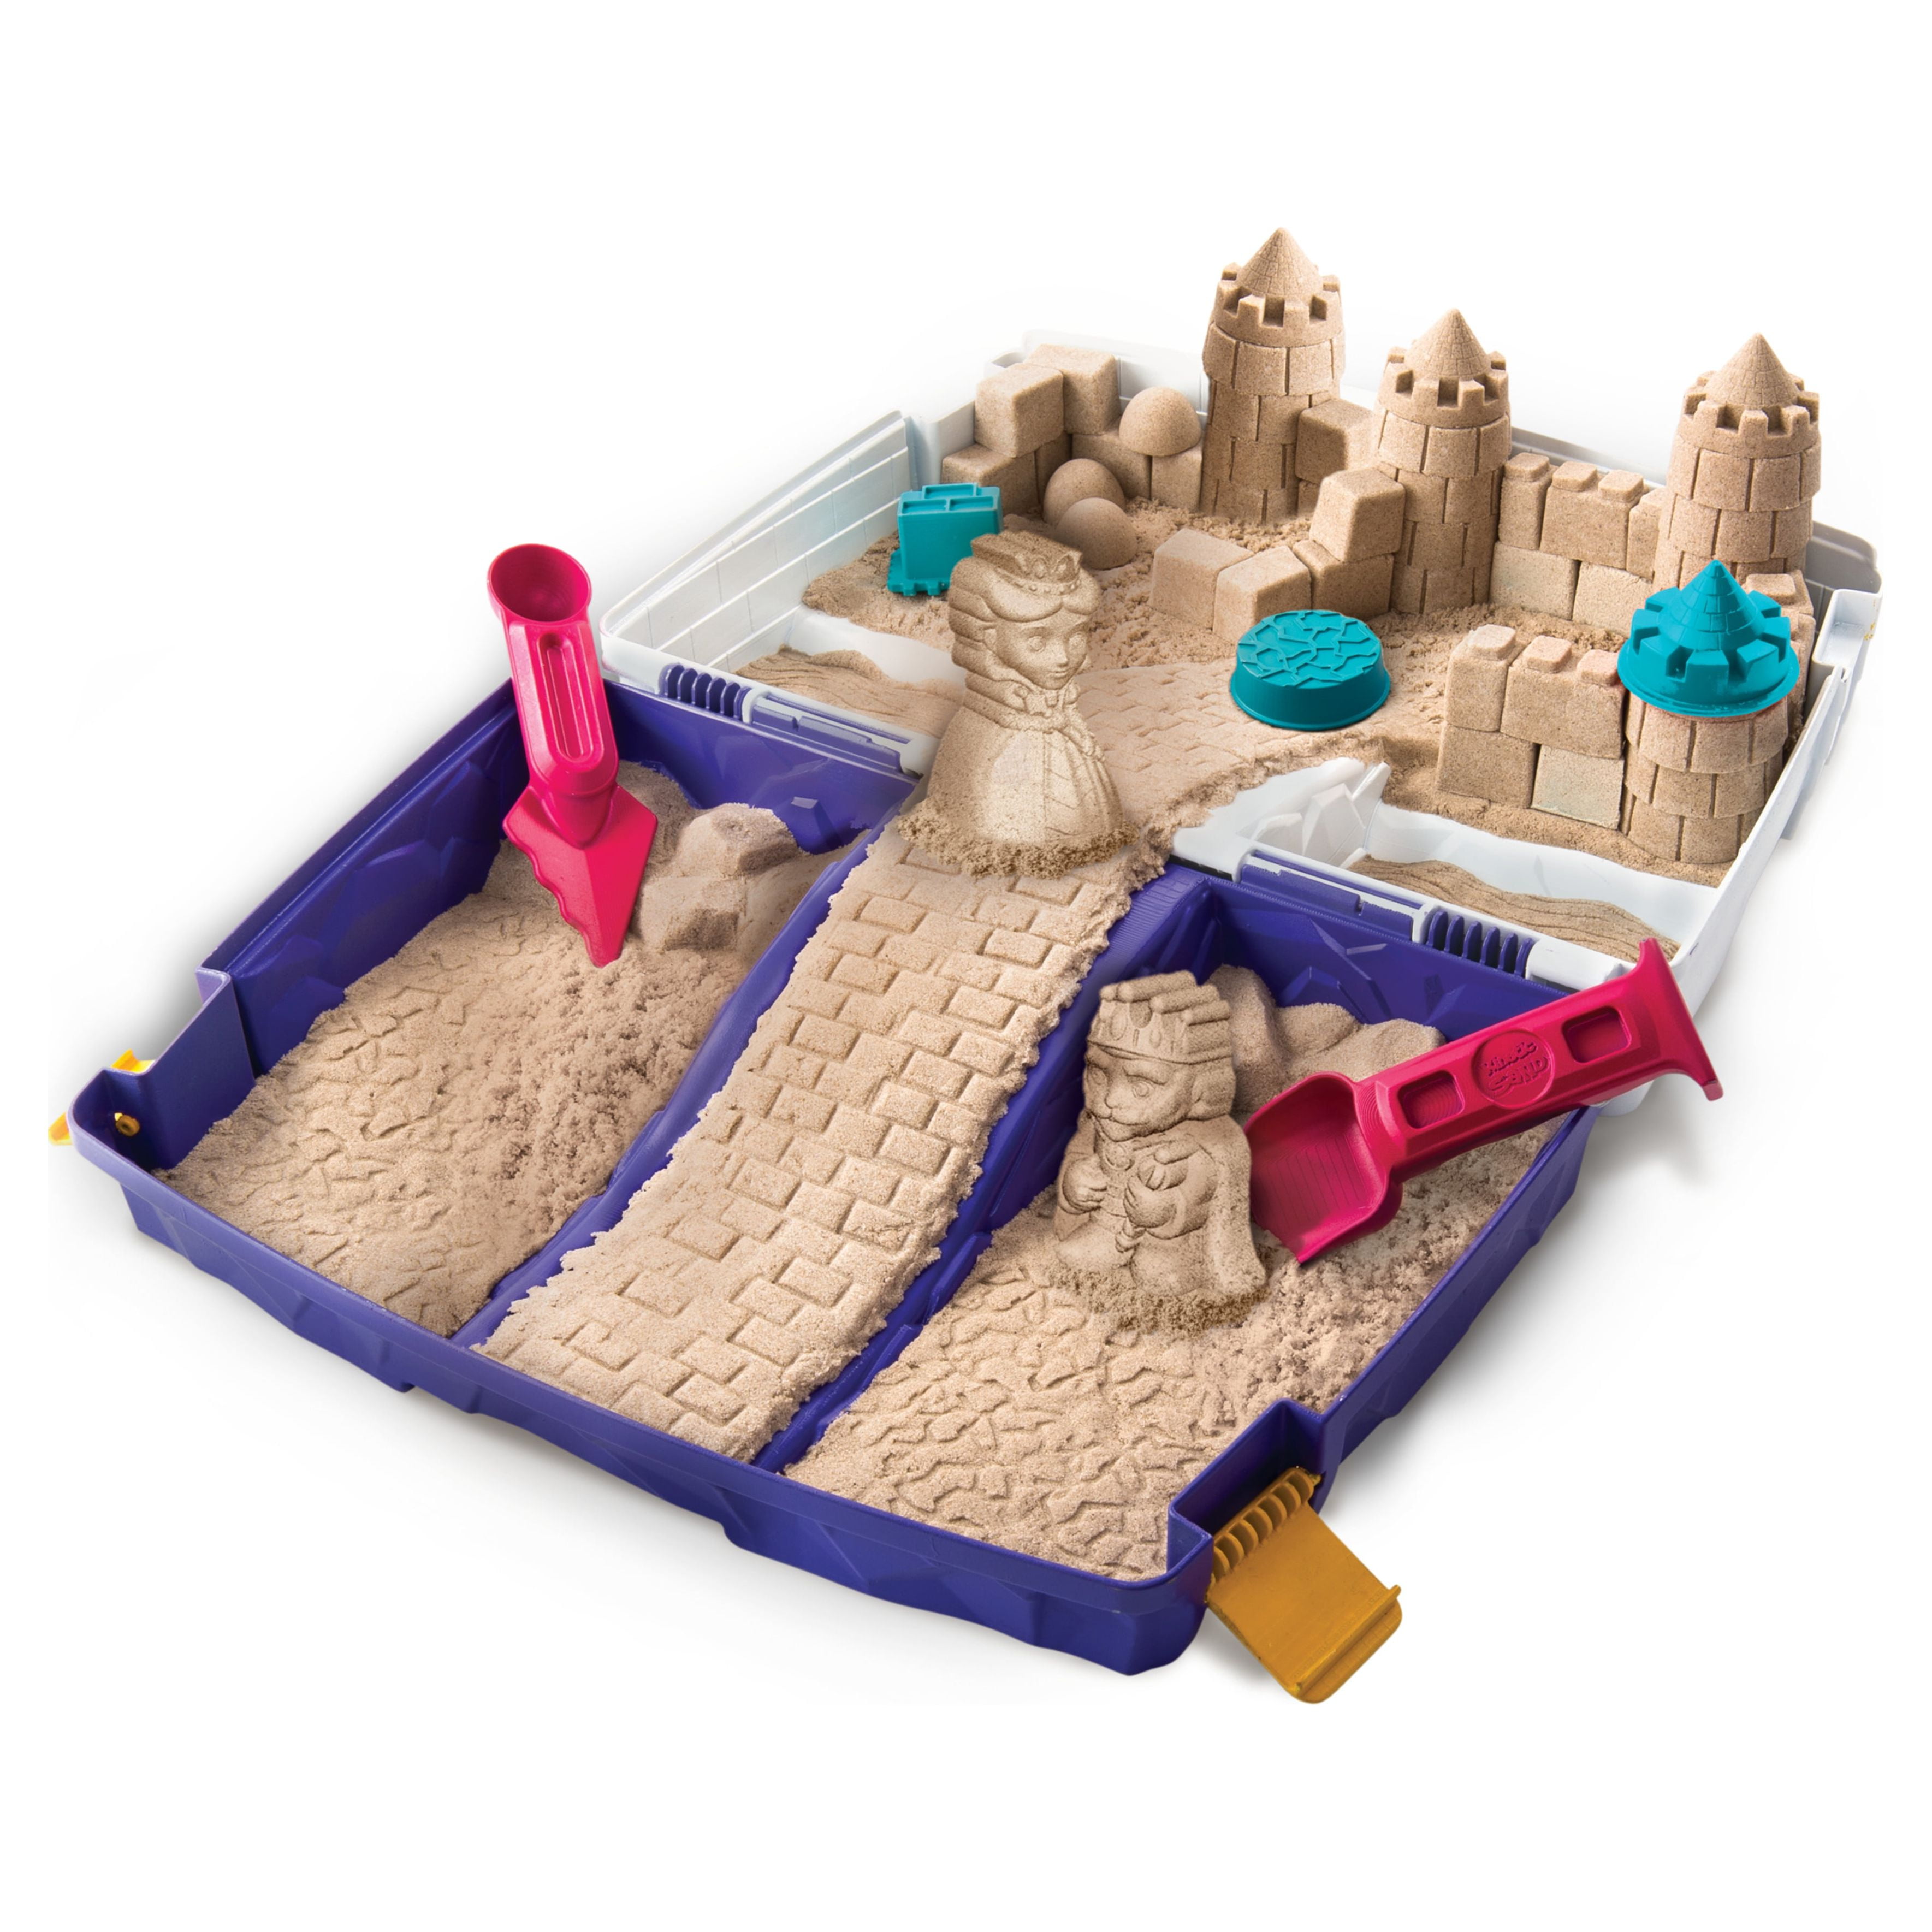 Best Deal for Kinetic Sand, Super Sandbox Set with 10lbs of Kinetic Sand